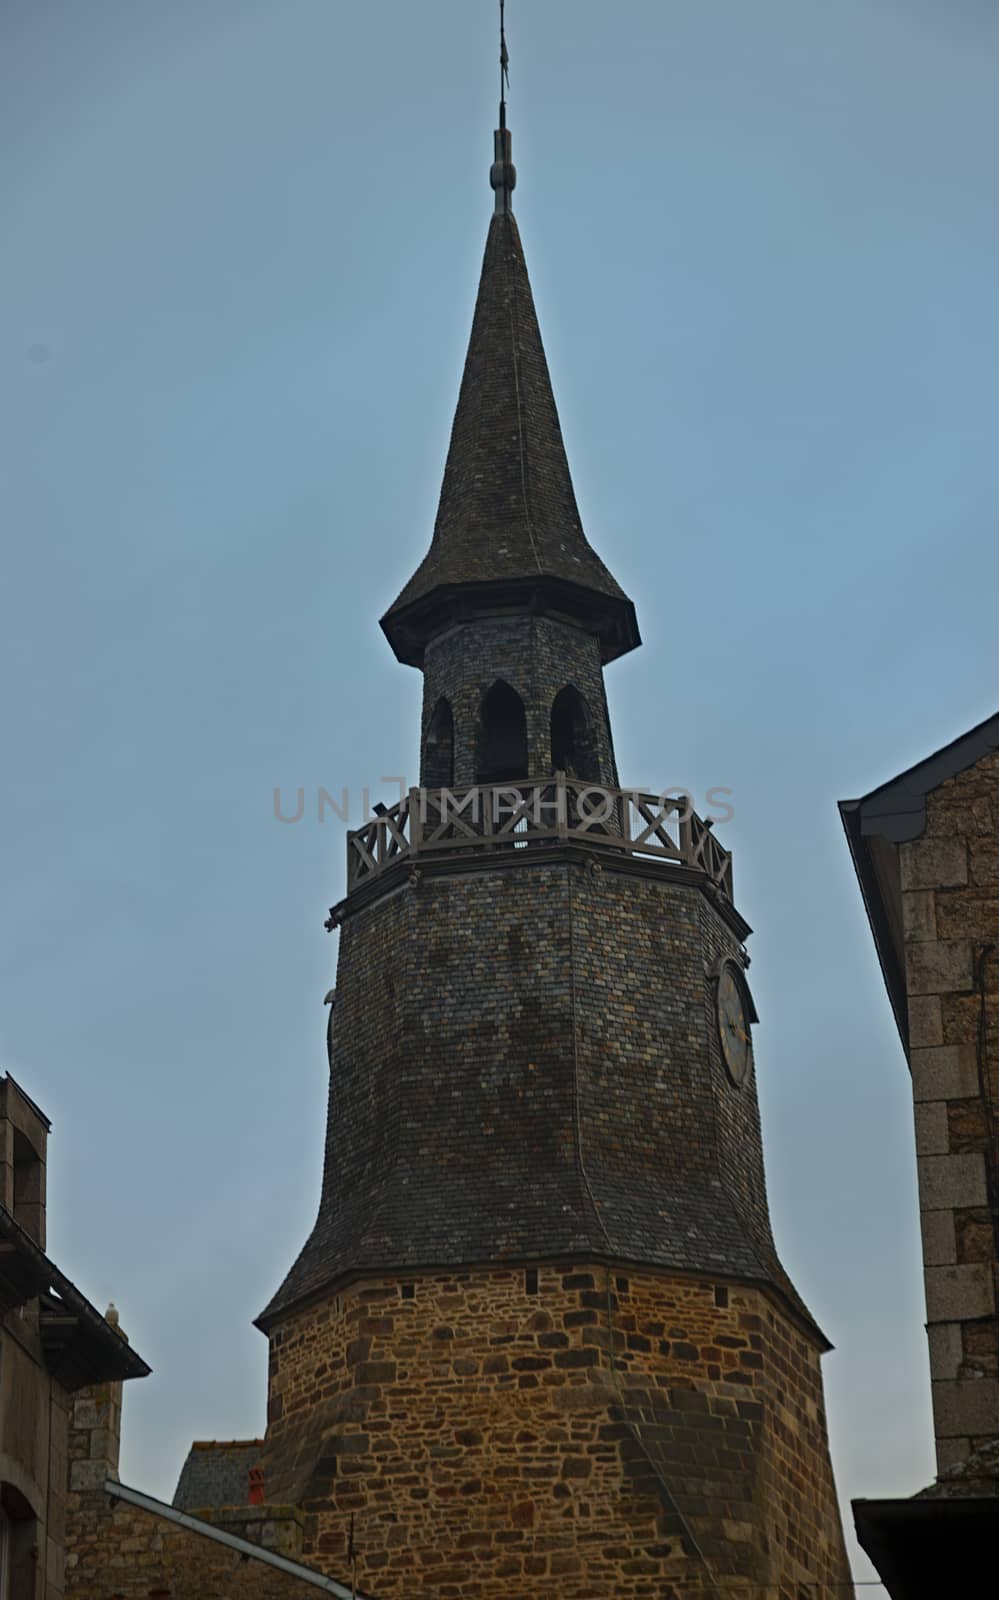 Old medieval stone clock tower in Dinan, France